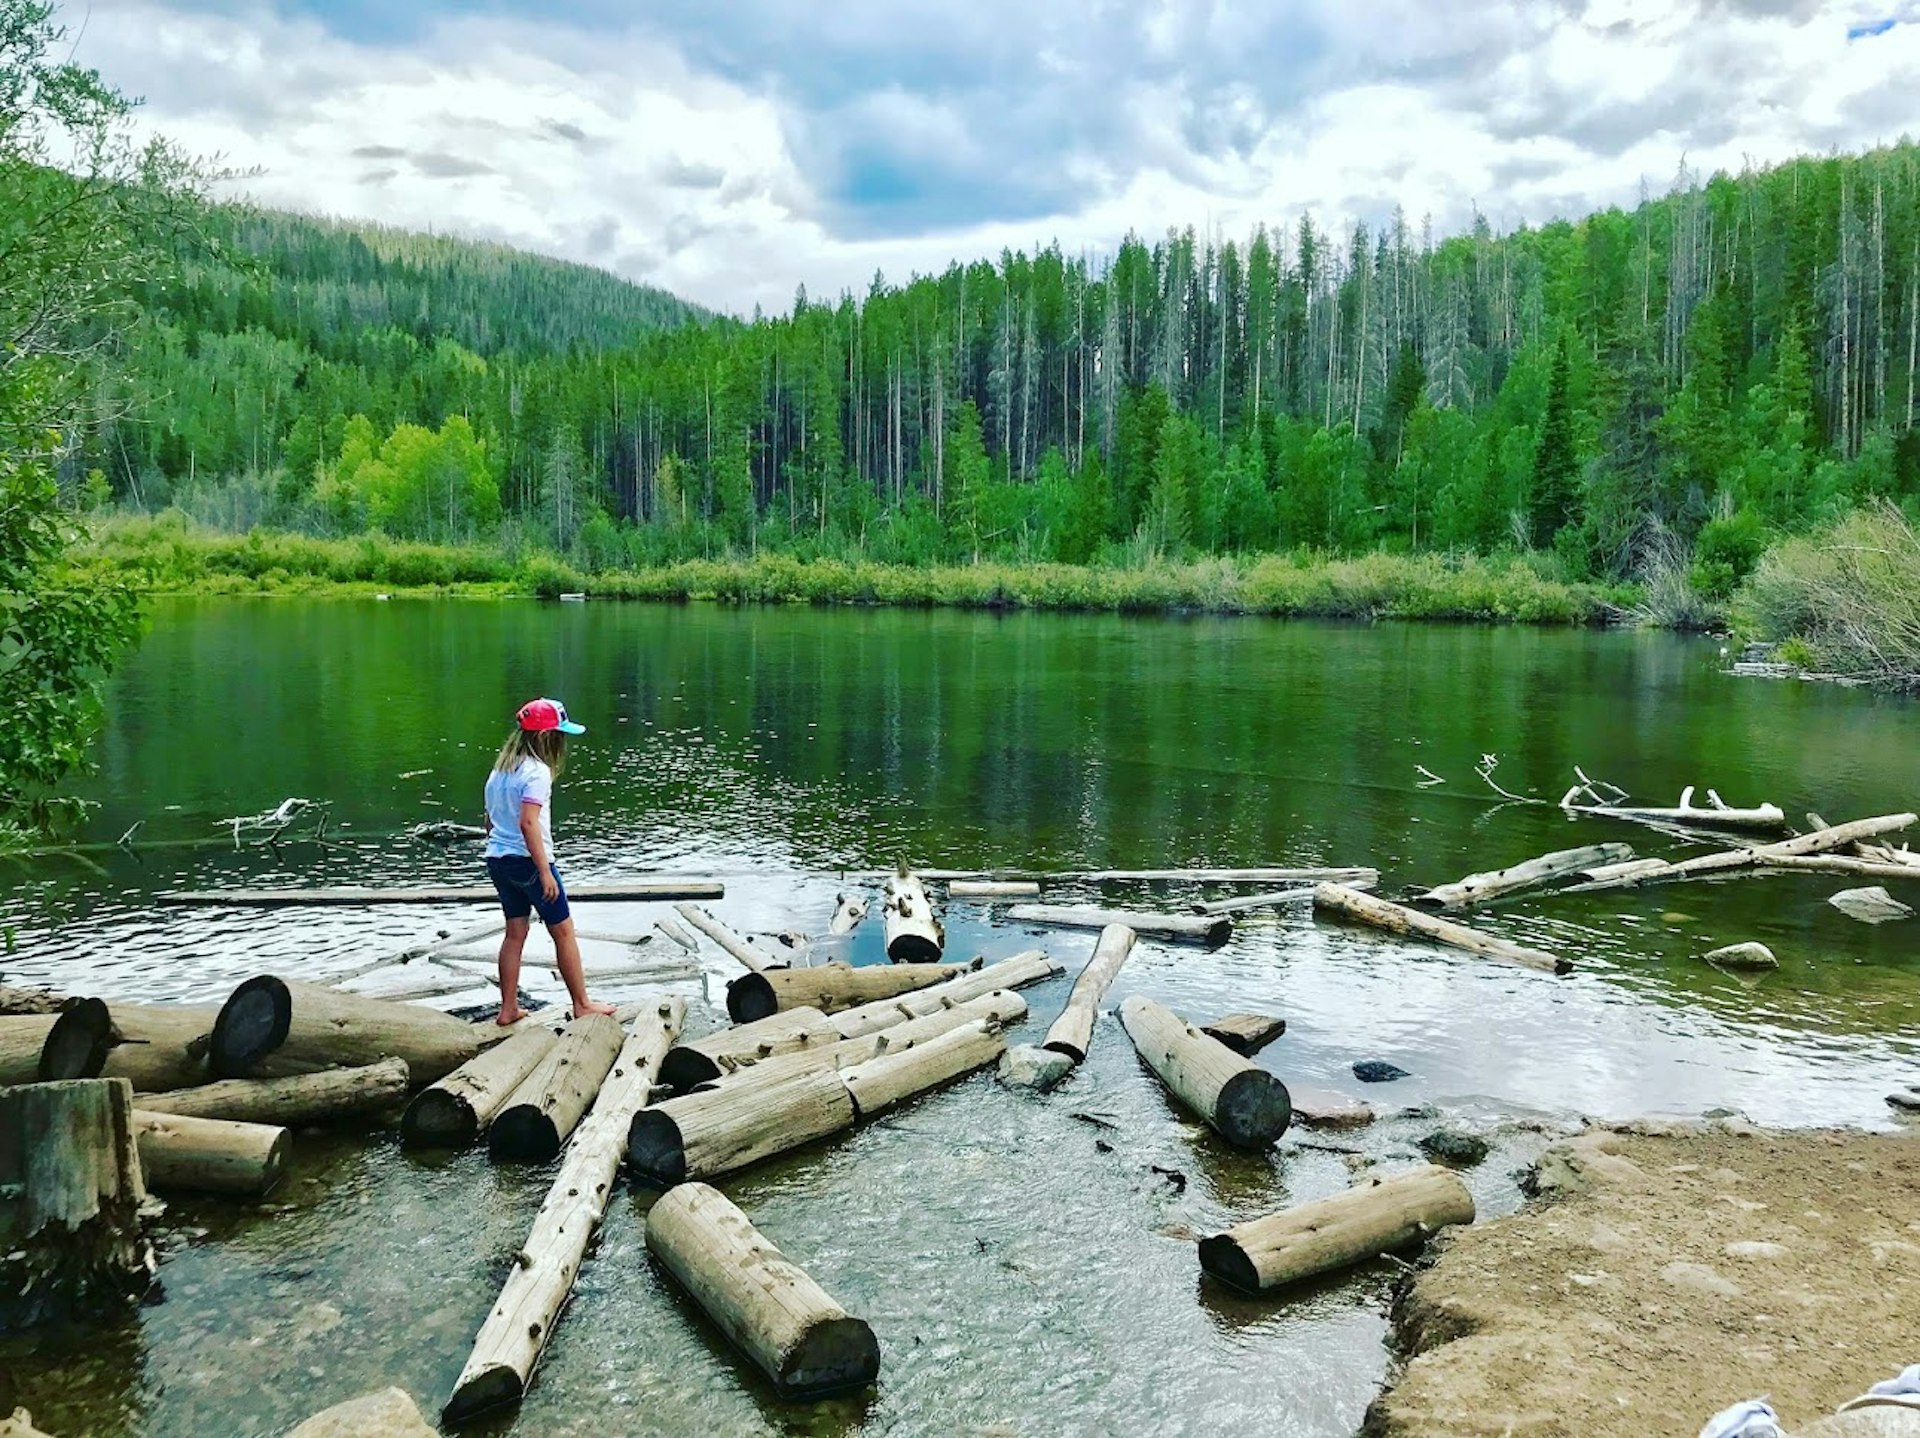 A barefoot girl picks her way across logs in a high-alpine lake